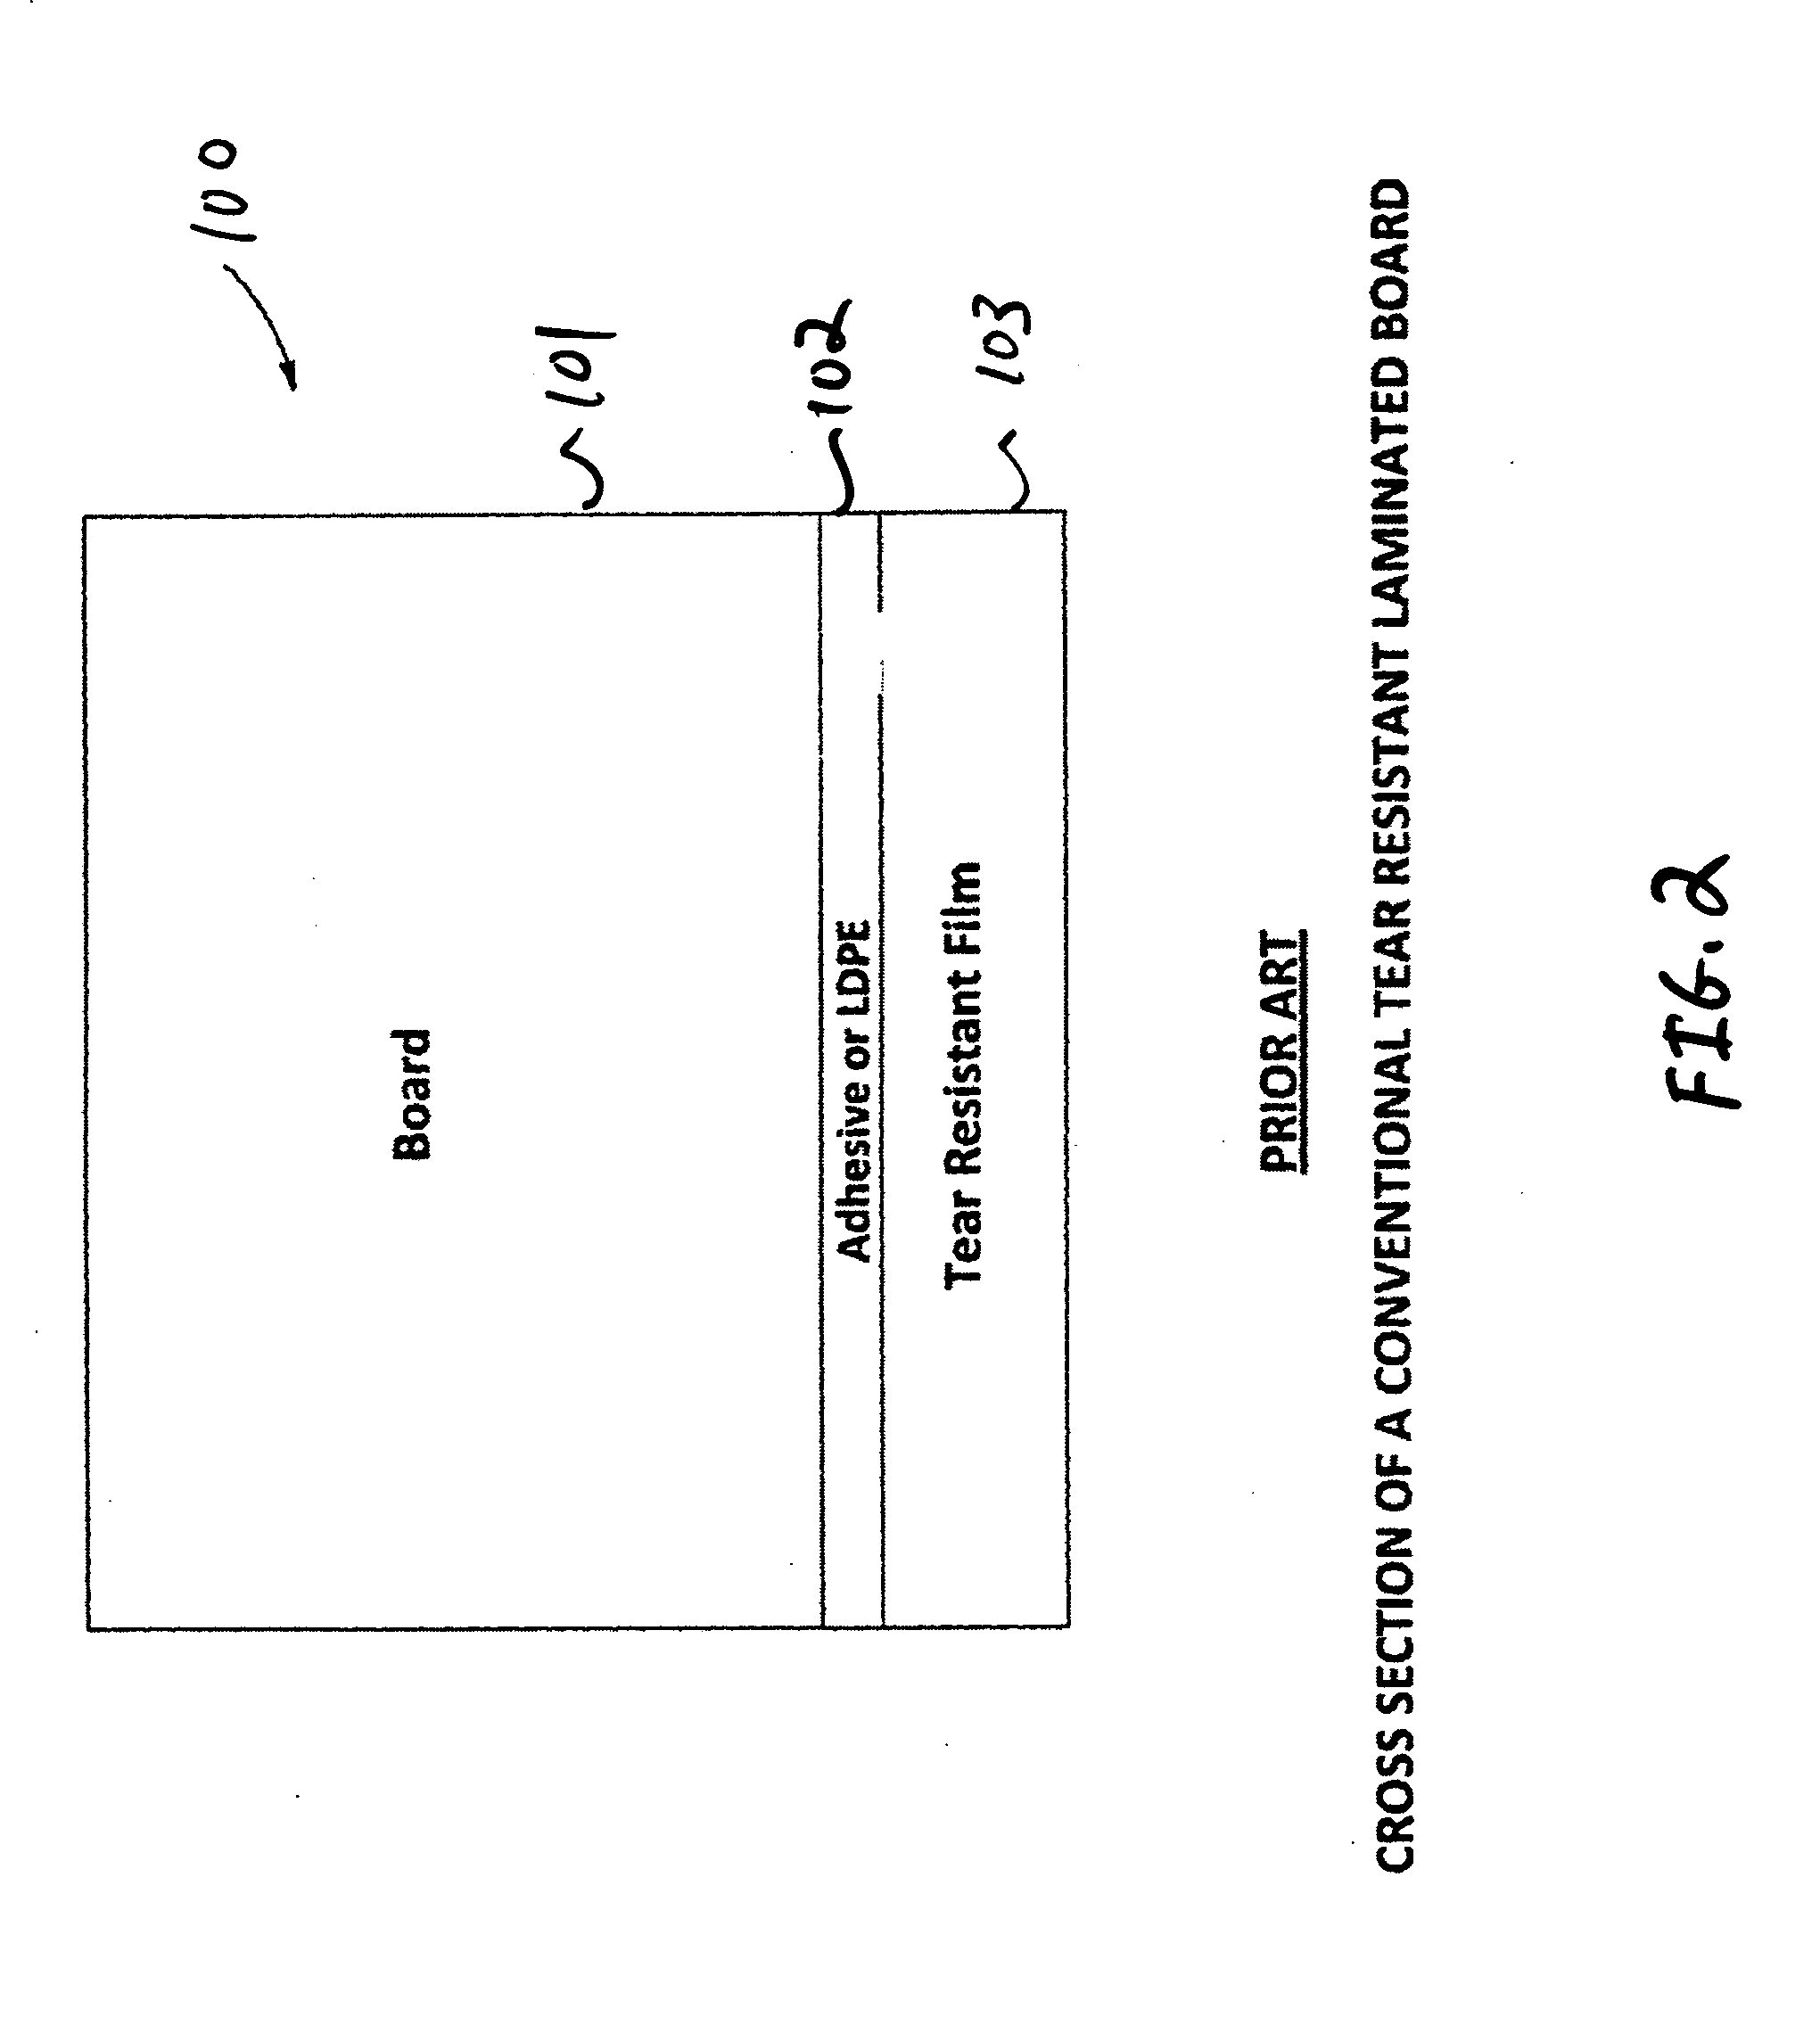 Tear resistant paperboard structure and method